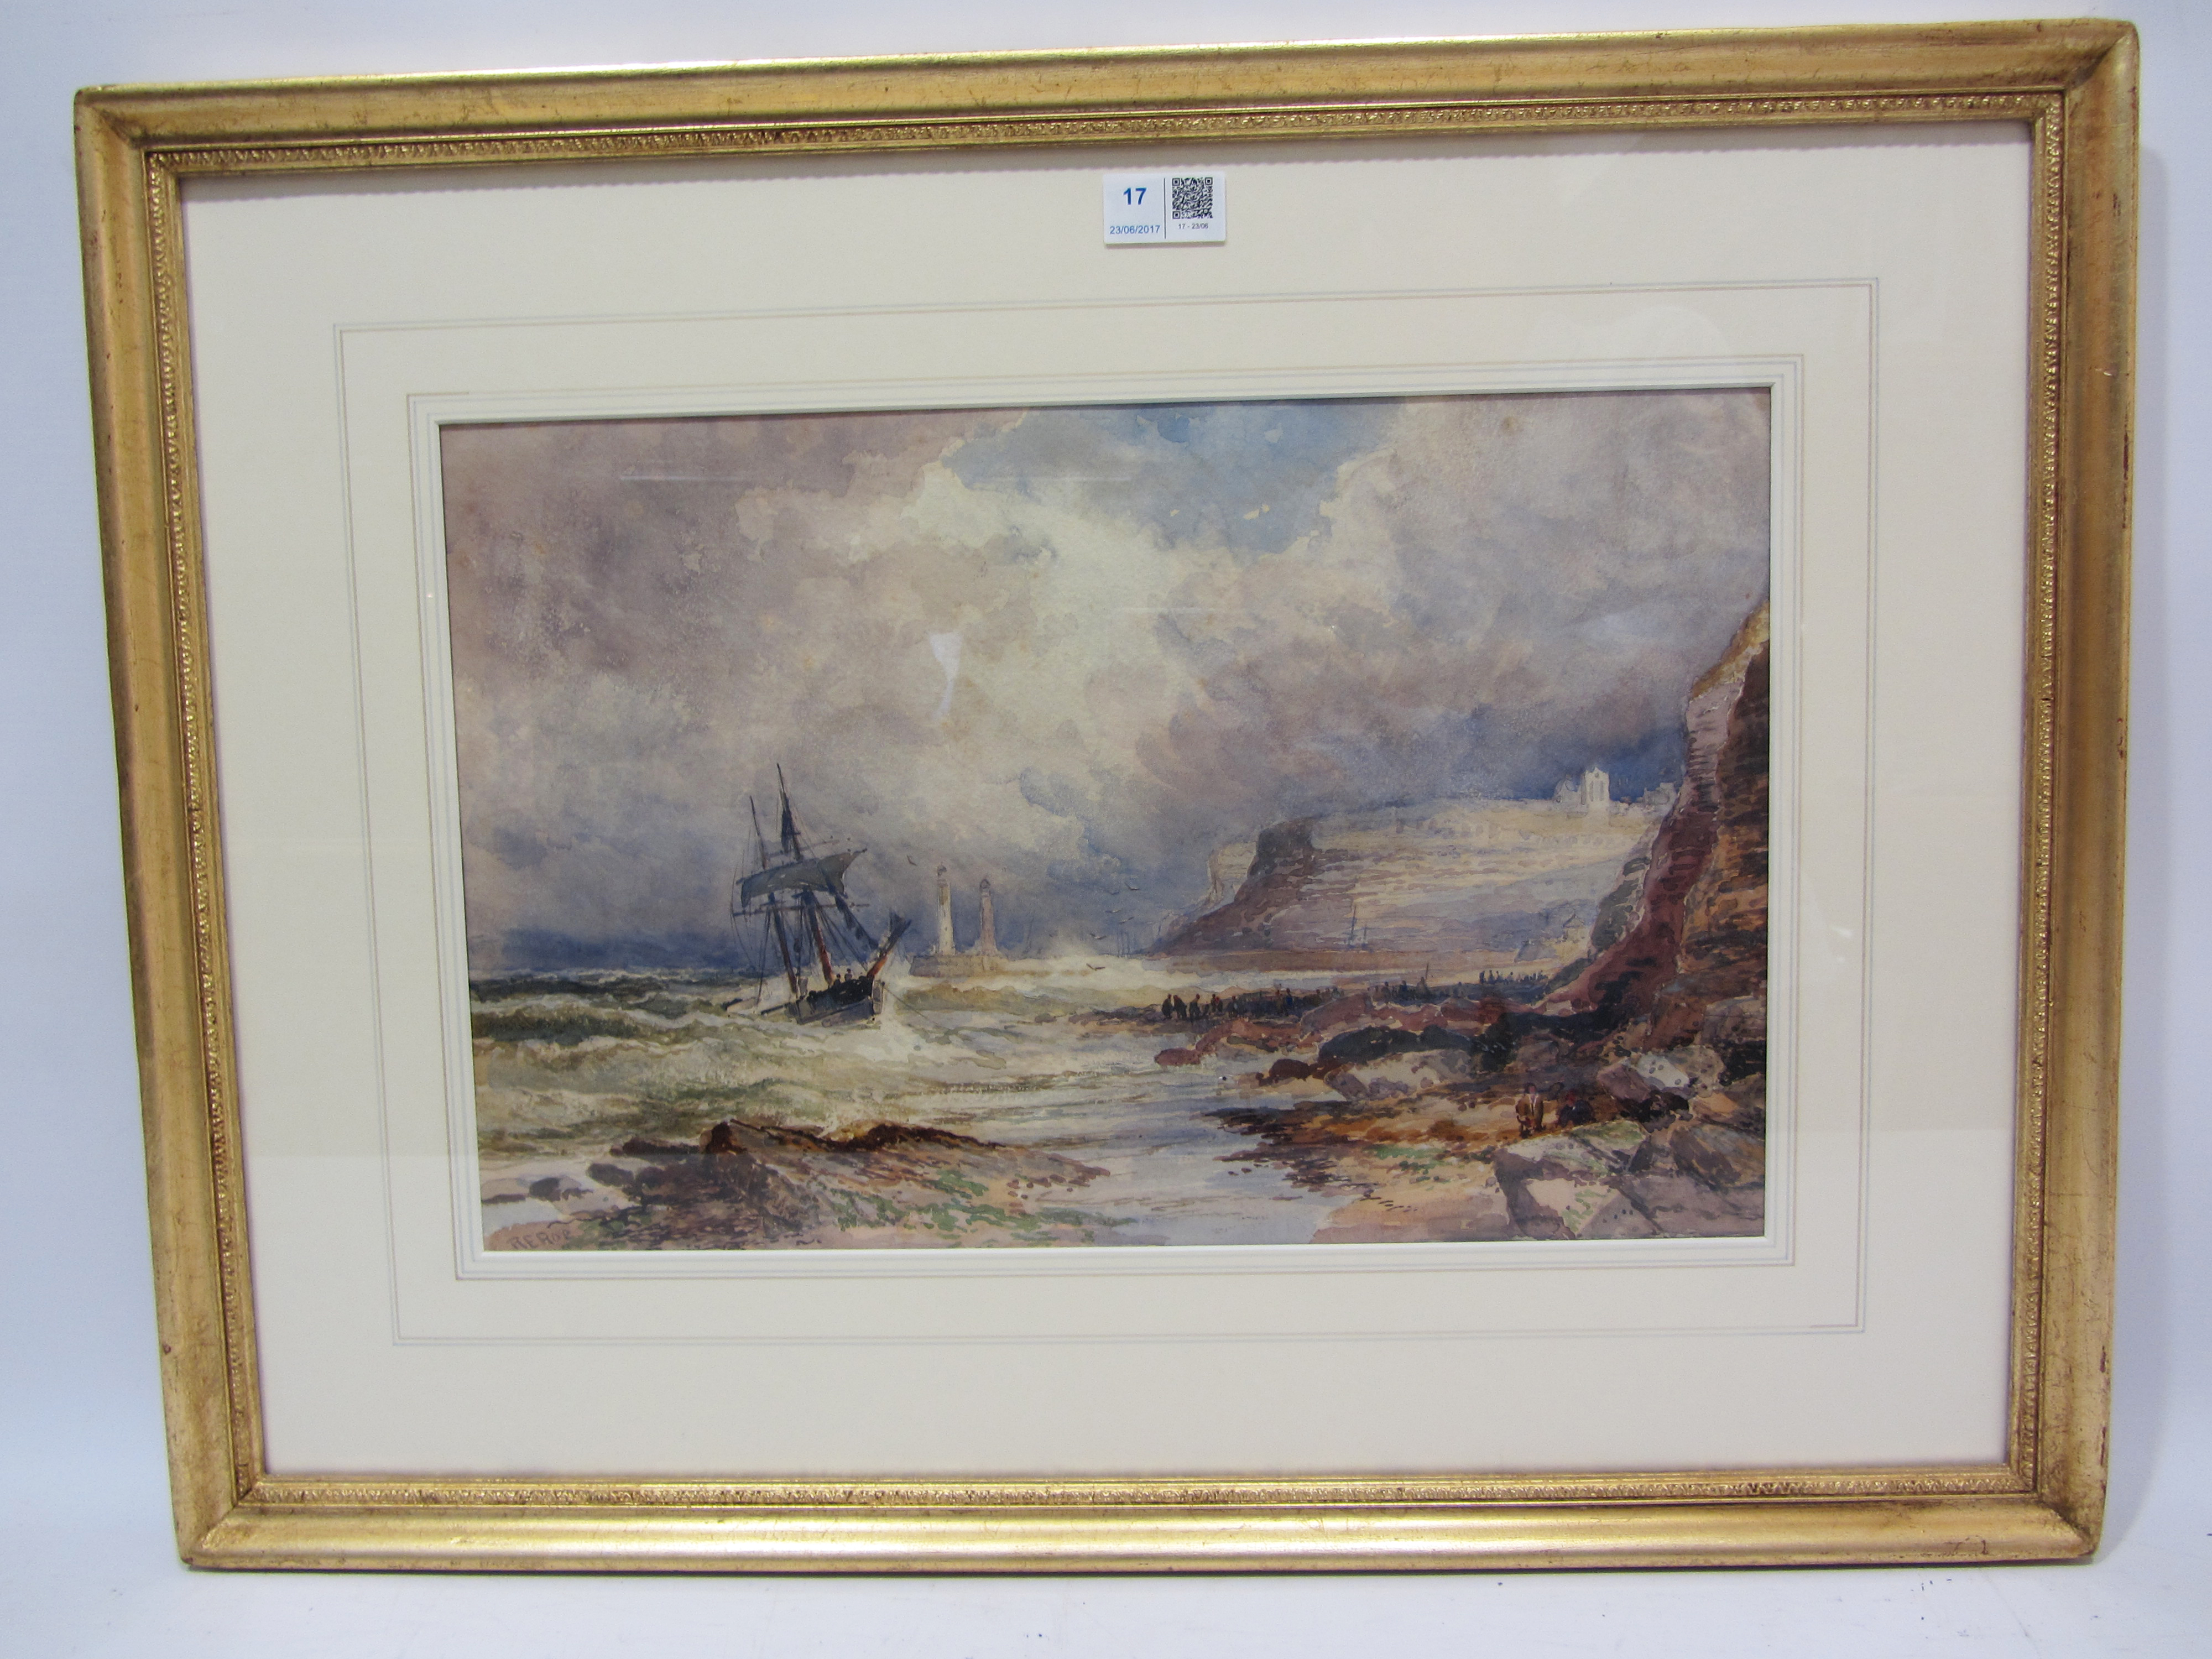 Robert Ernest Roe (British 1852-1921): 'The Brig Mary & Agness in Distress Whitby Sands 24th Oct. - Image 2 of 2